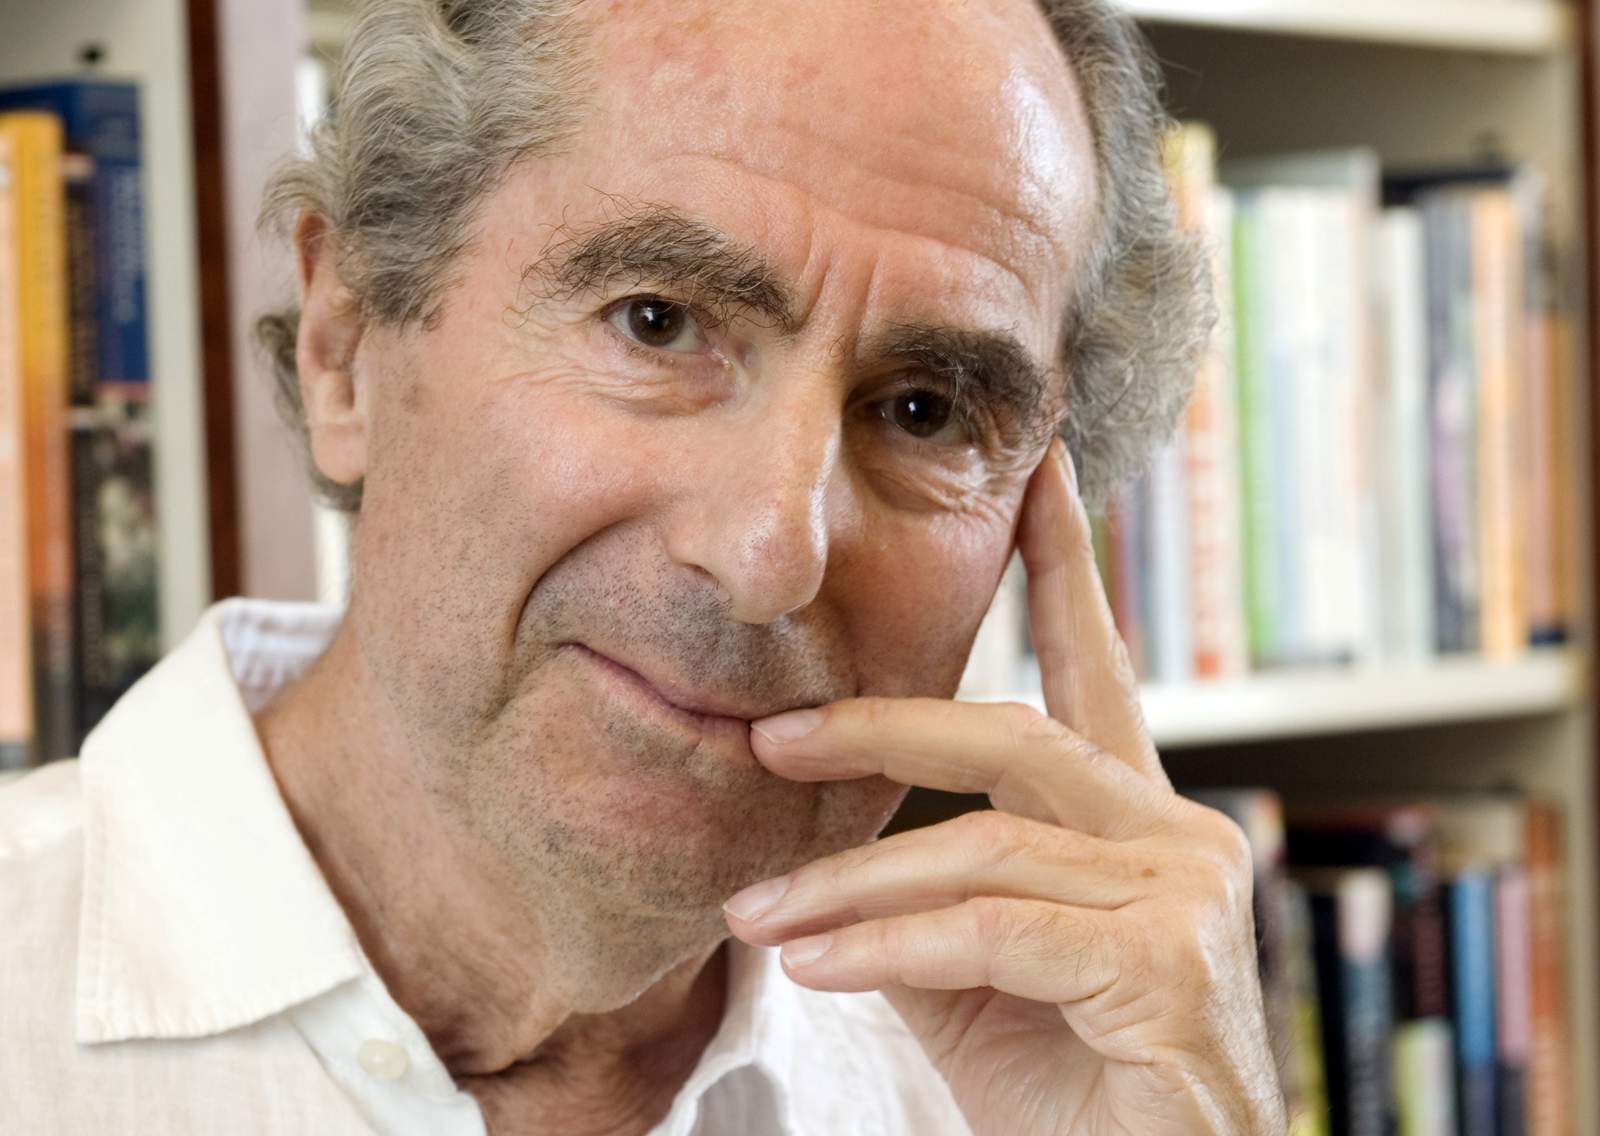 'Philip Roth': Blake Bailey's story behind the story arrives